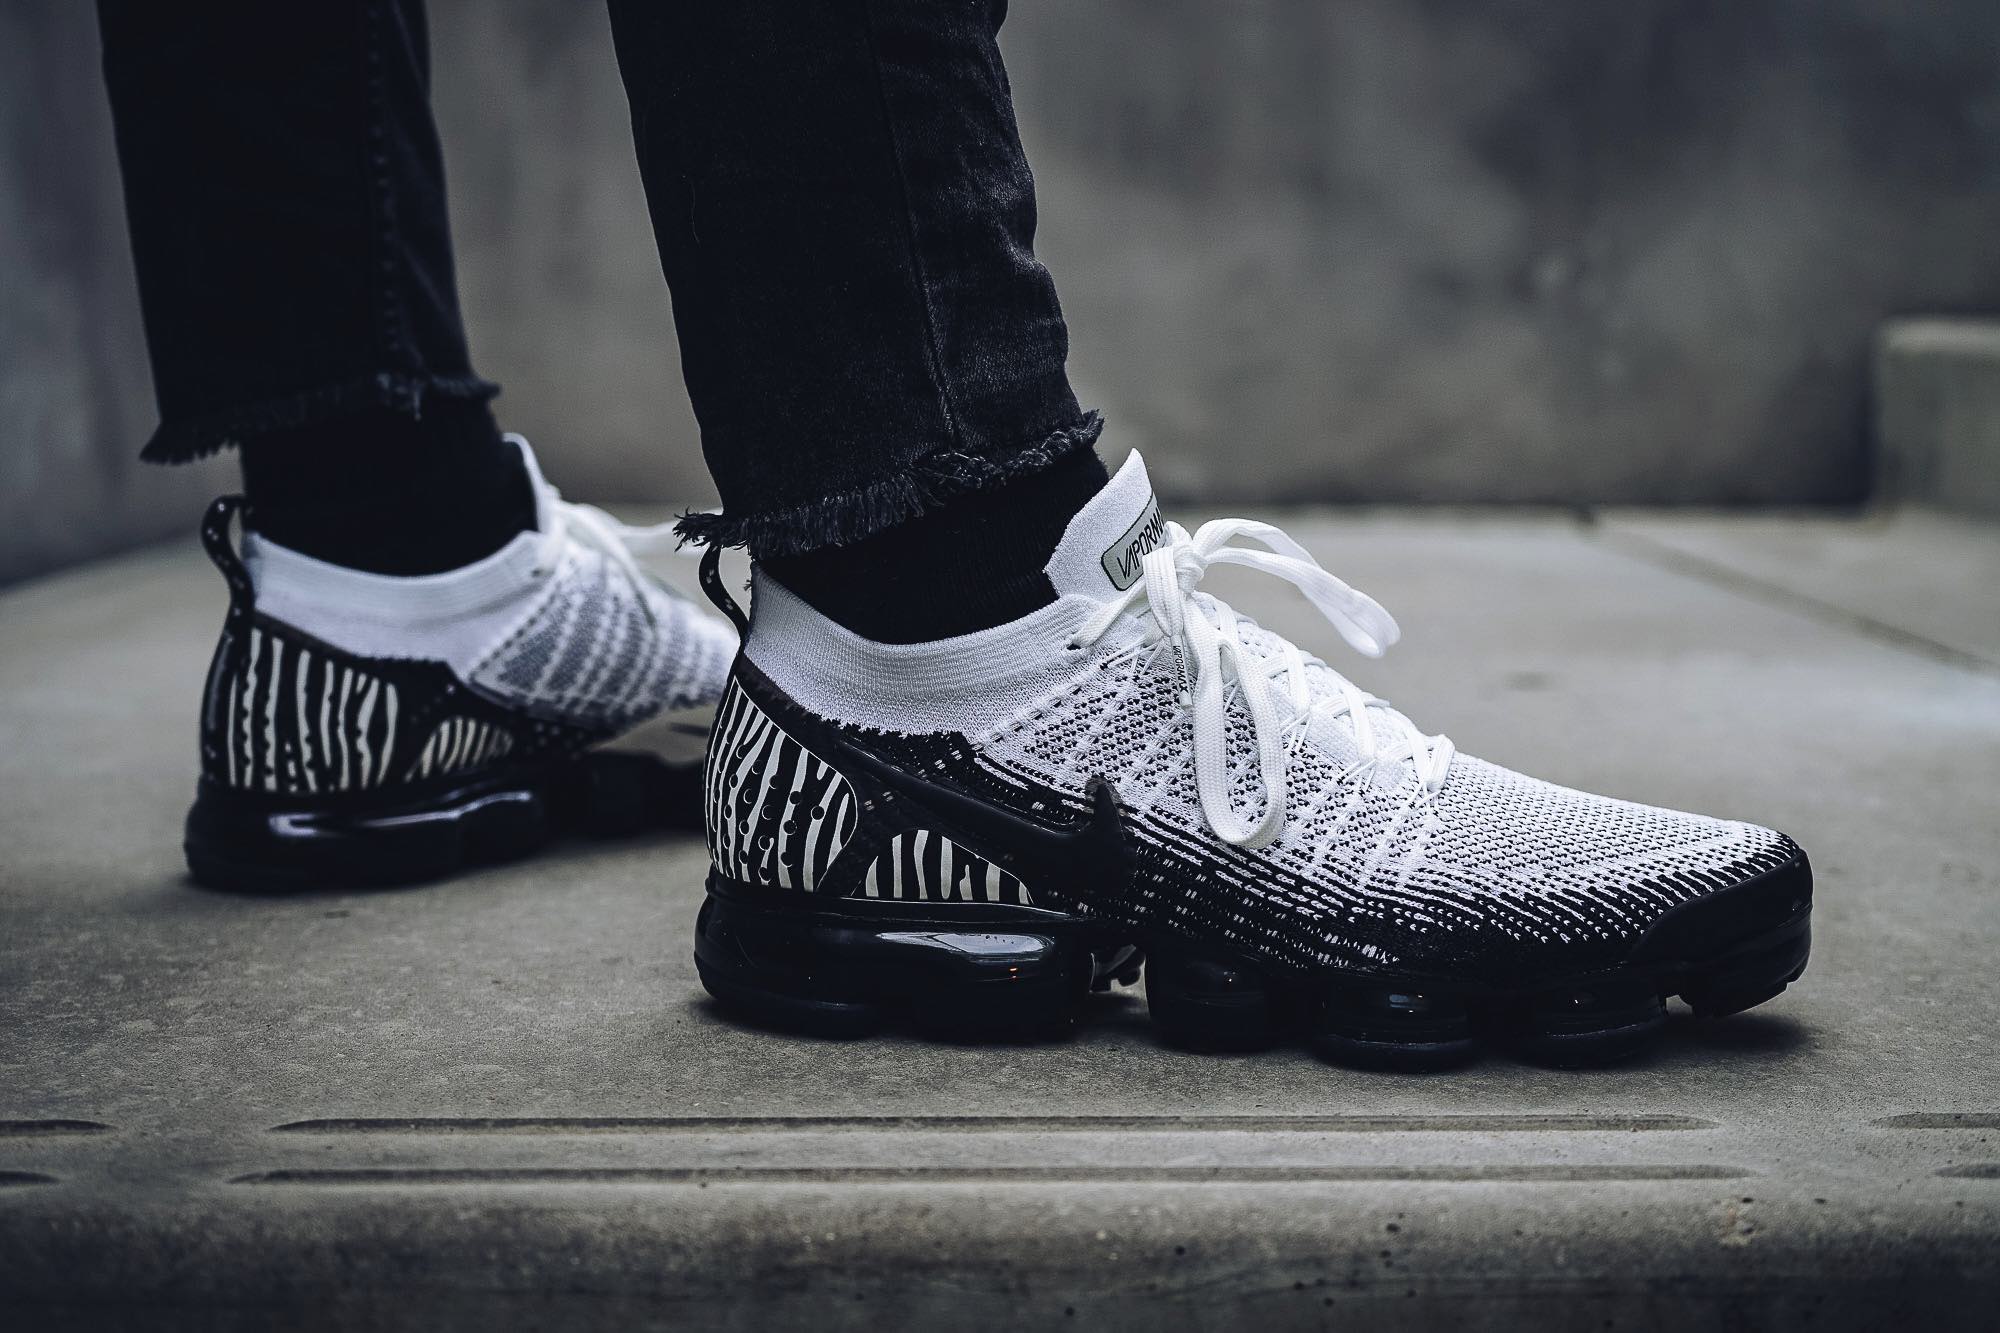 Available Now: Nike Air Vapormax 2.0 'Zebra' | The Sole Supplier